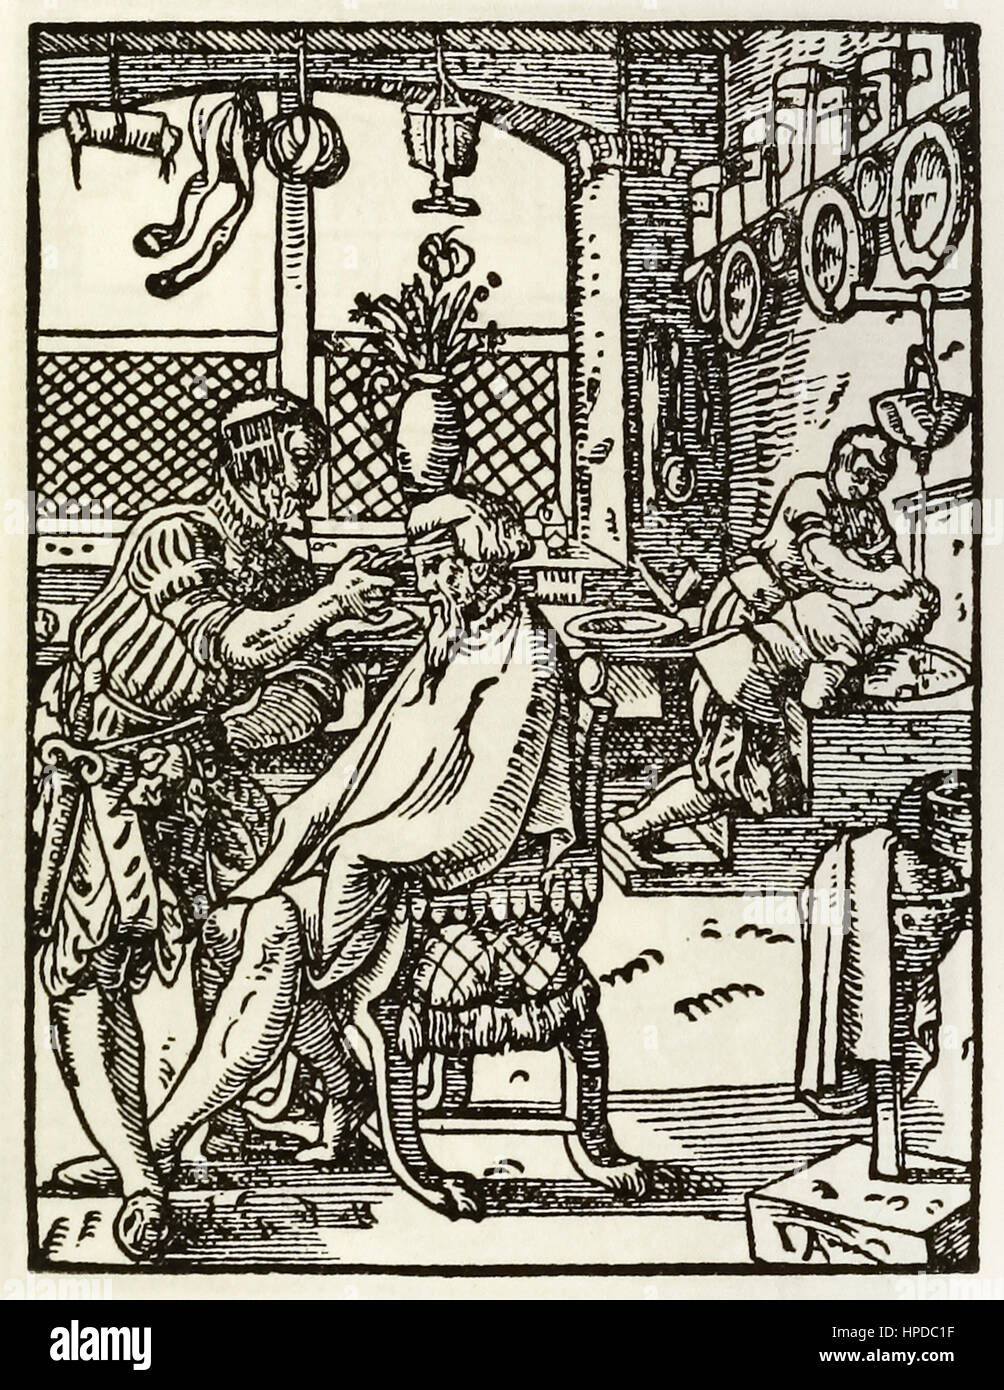 ‘The Barbers’ woodcut by Jost Amman (1539-1591) from a series depicting occupations and trades first published in ‘Das Ständebuch’ 1568 in Frankfurt, Germany. Stock Photo